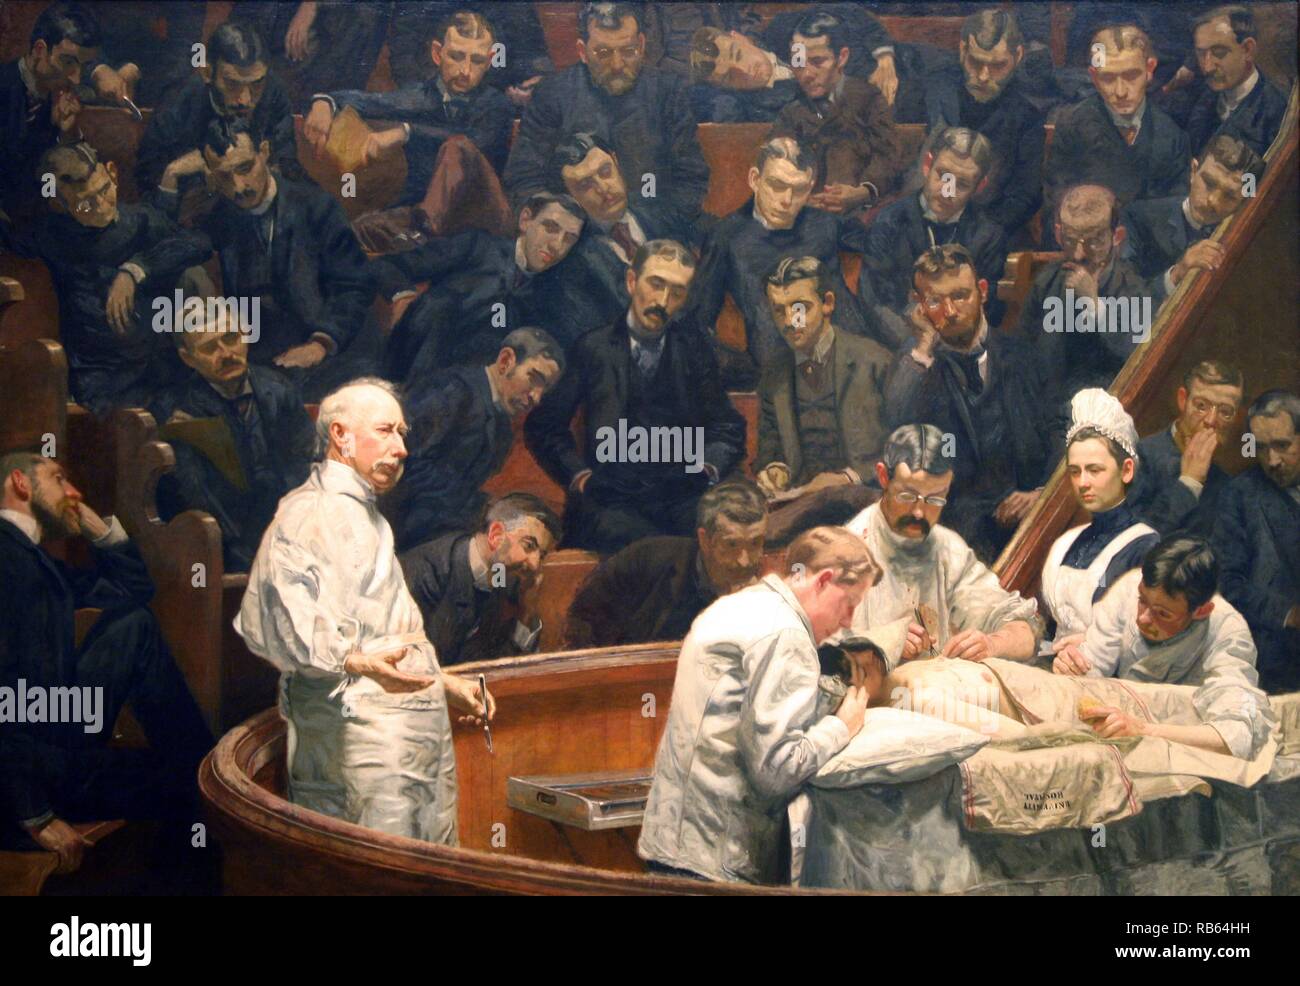 The Agnew Clinic by Thomas Eakins. The Agnew Clinic, or, The Clinic of Dr. Agnew, is an 1889 oil painting by American artist Thomas Eakins. commissioned to honor anatomist and surgeon David Hayes Agnew, on his retirement from teaching at the University of Pennsylvania Stock Photo